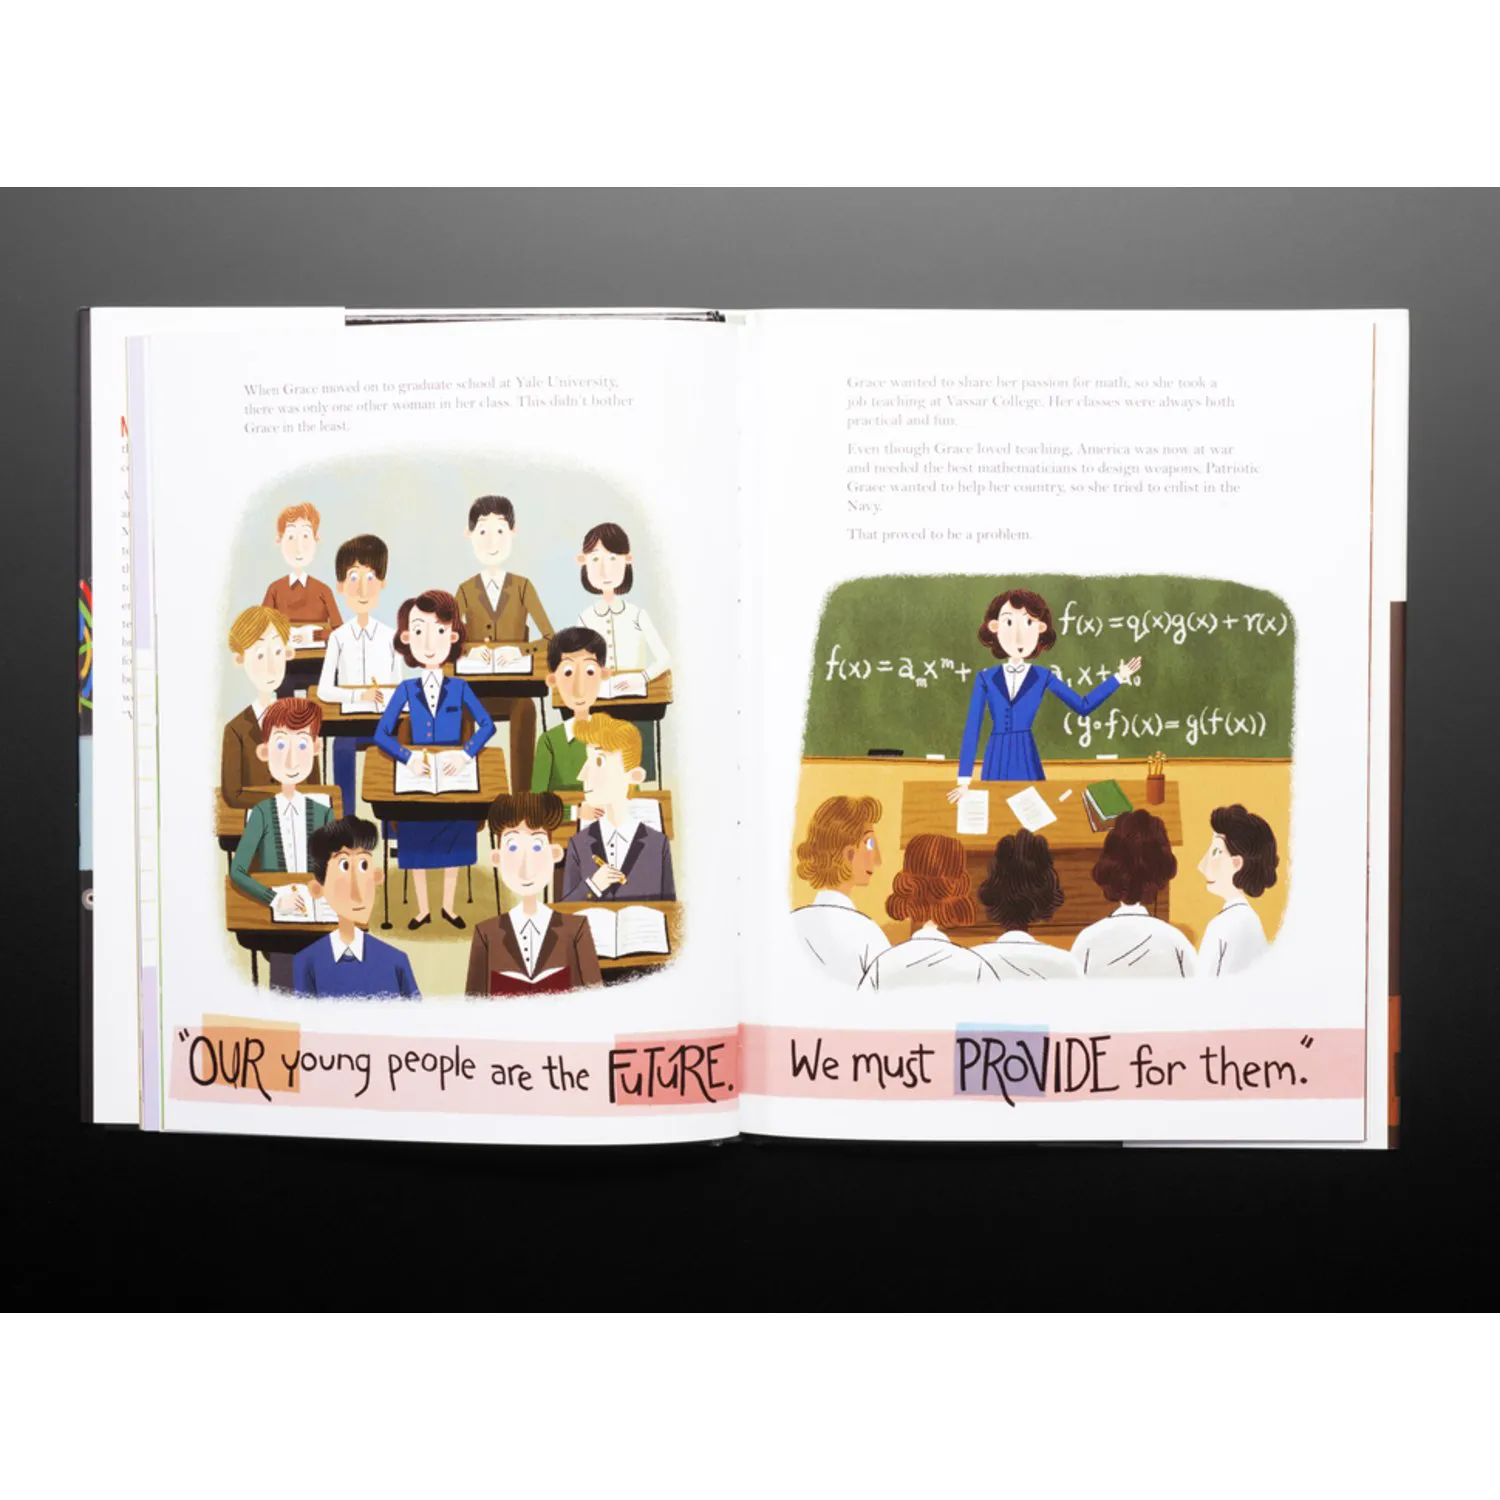 Photo of Grace Hopper: Queen of Computer Code by Laurie Wallmark - Illustrated by Katy Wu